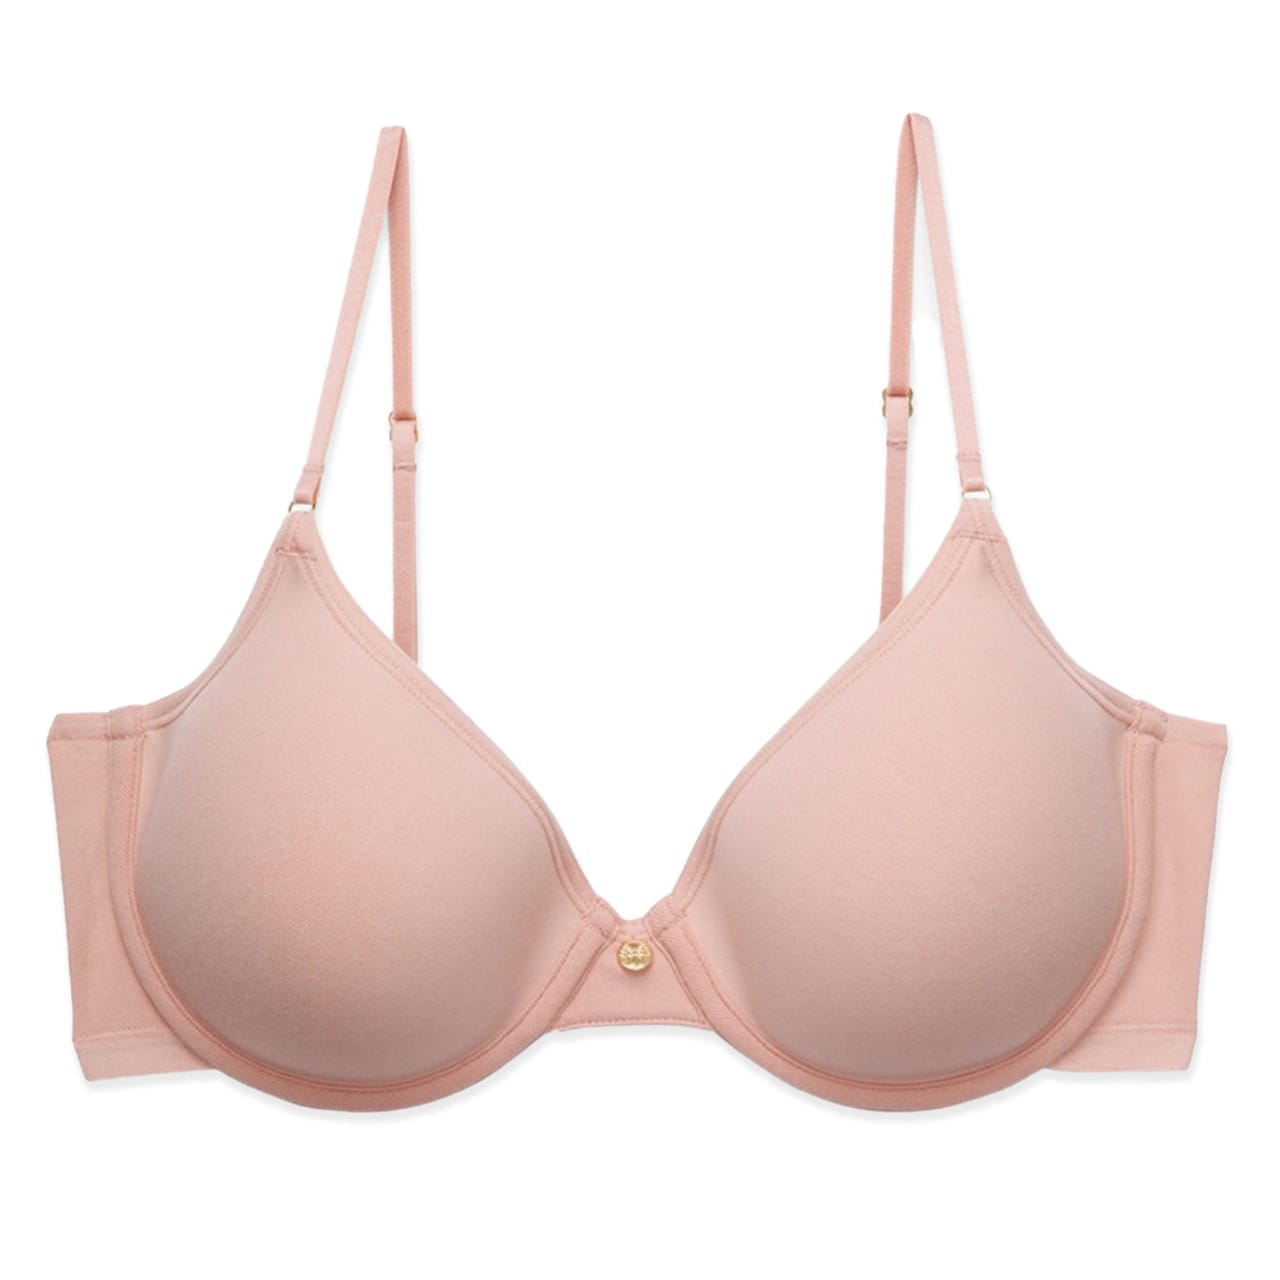 The Best Bras for Every Occasion - Buy Side from WSJ